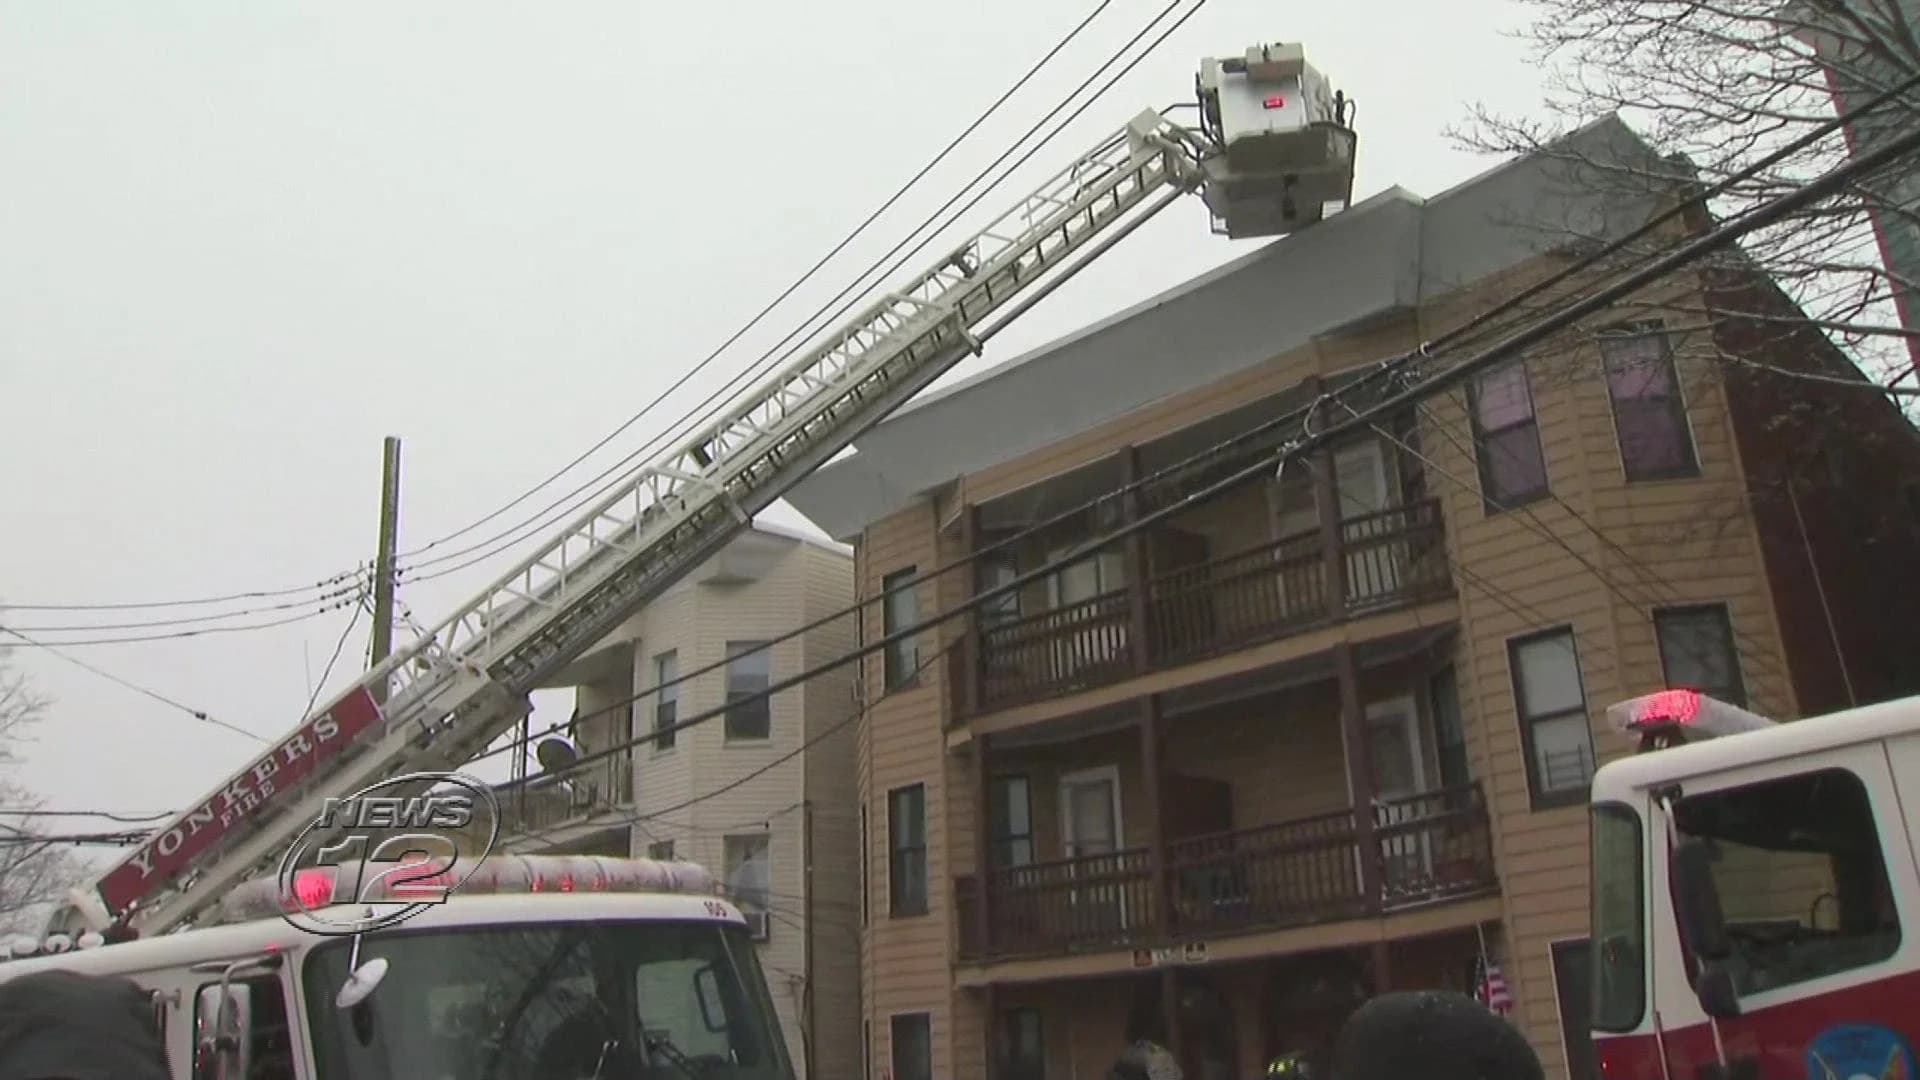 25 displaced after fire destroys multifamily building in Yonkers